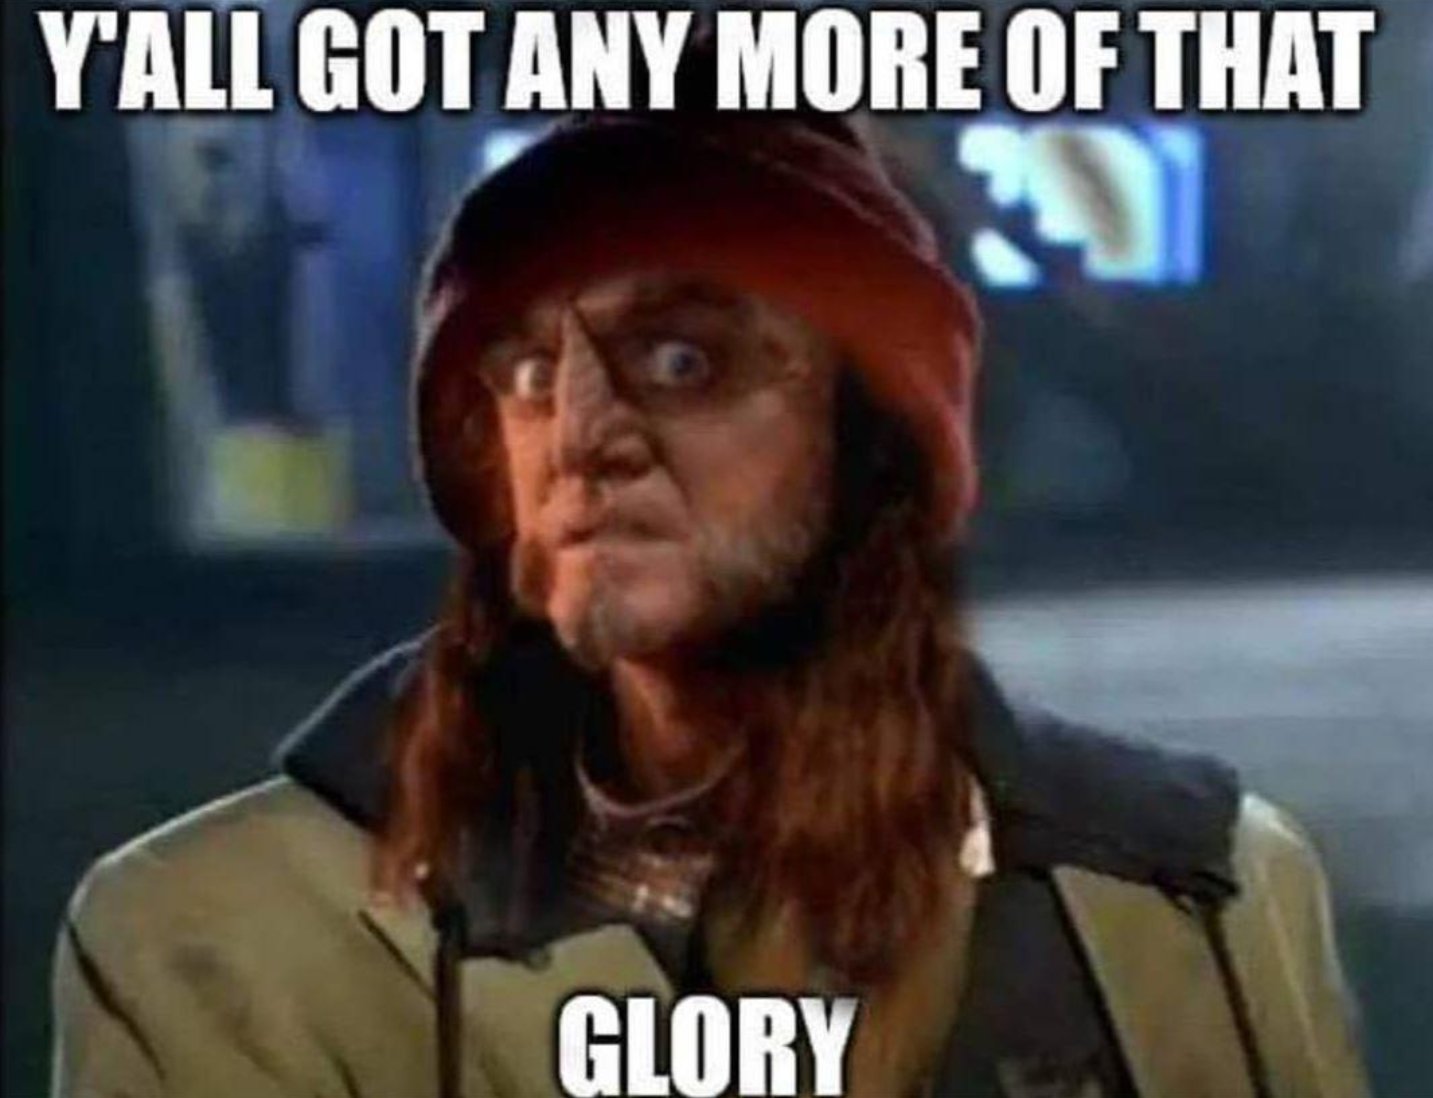 Y'all got any more of that Glory? (Gowron as Tyrone Biggums)